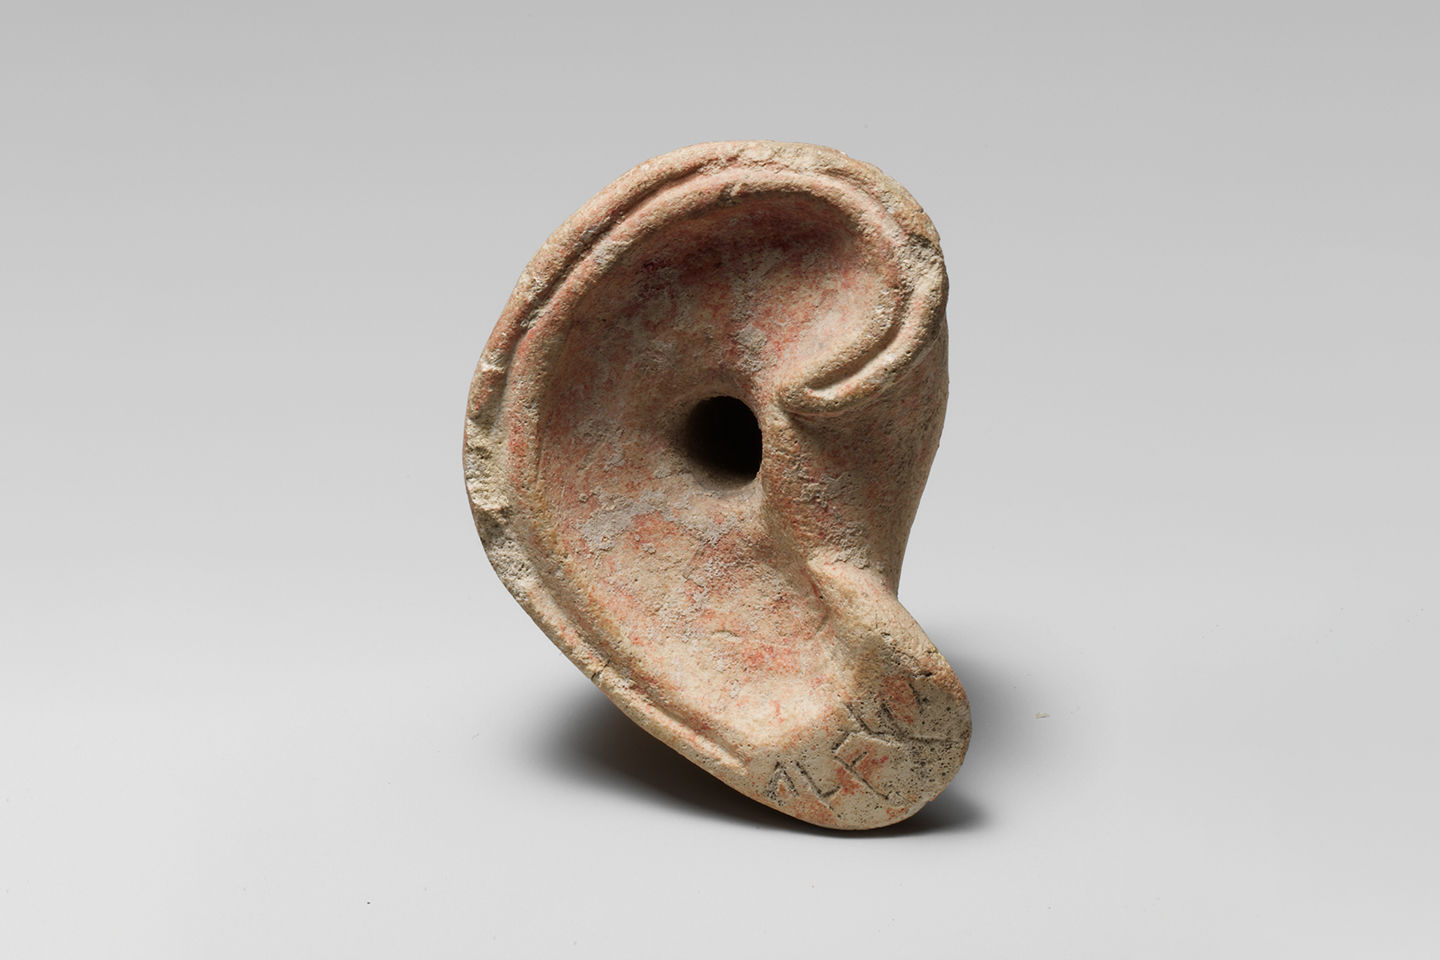 A right ear carved from limestone. Four syllabic signs can be seen on its lobe.